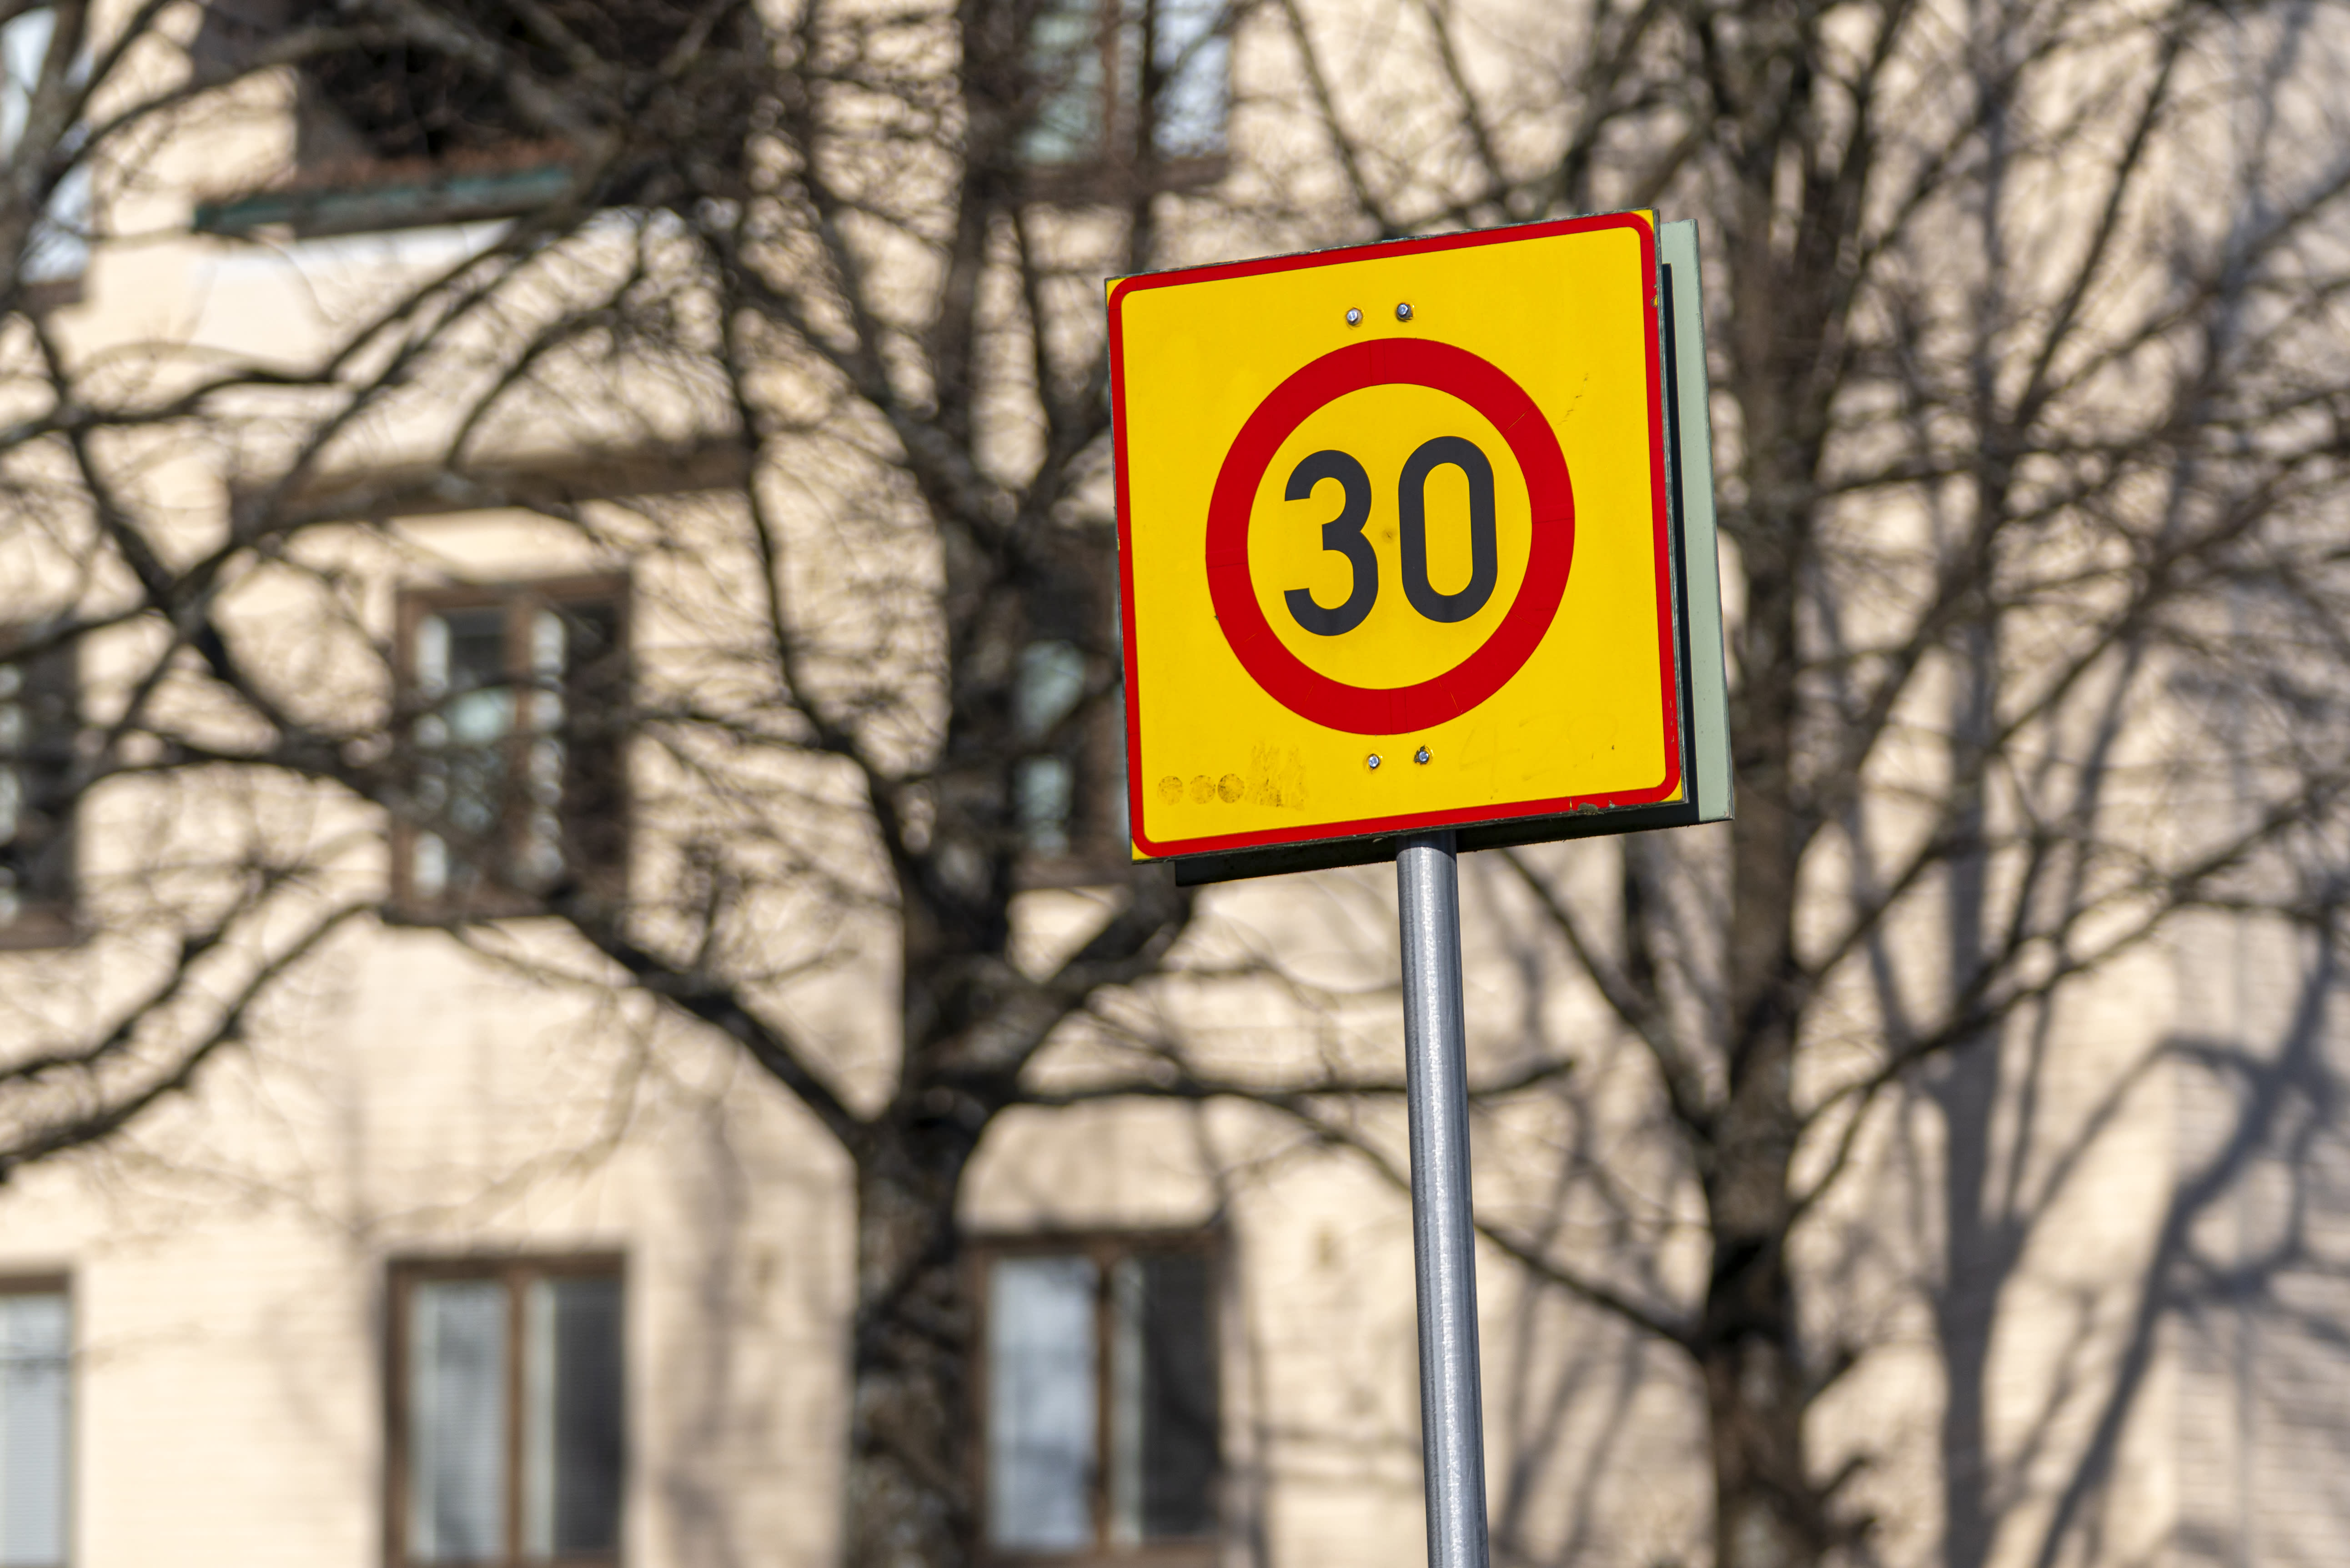 The ministry is proposing changes to traffic laws, speed limits